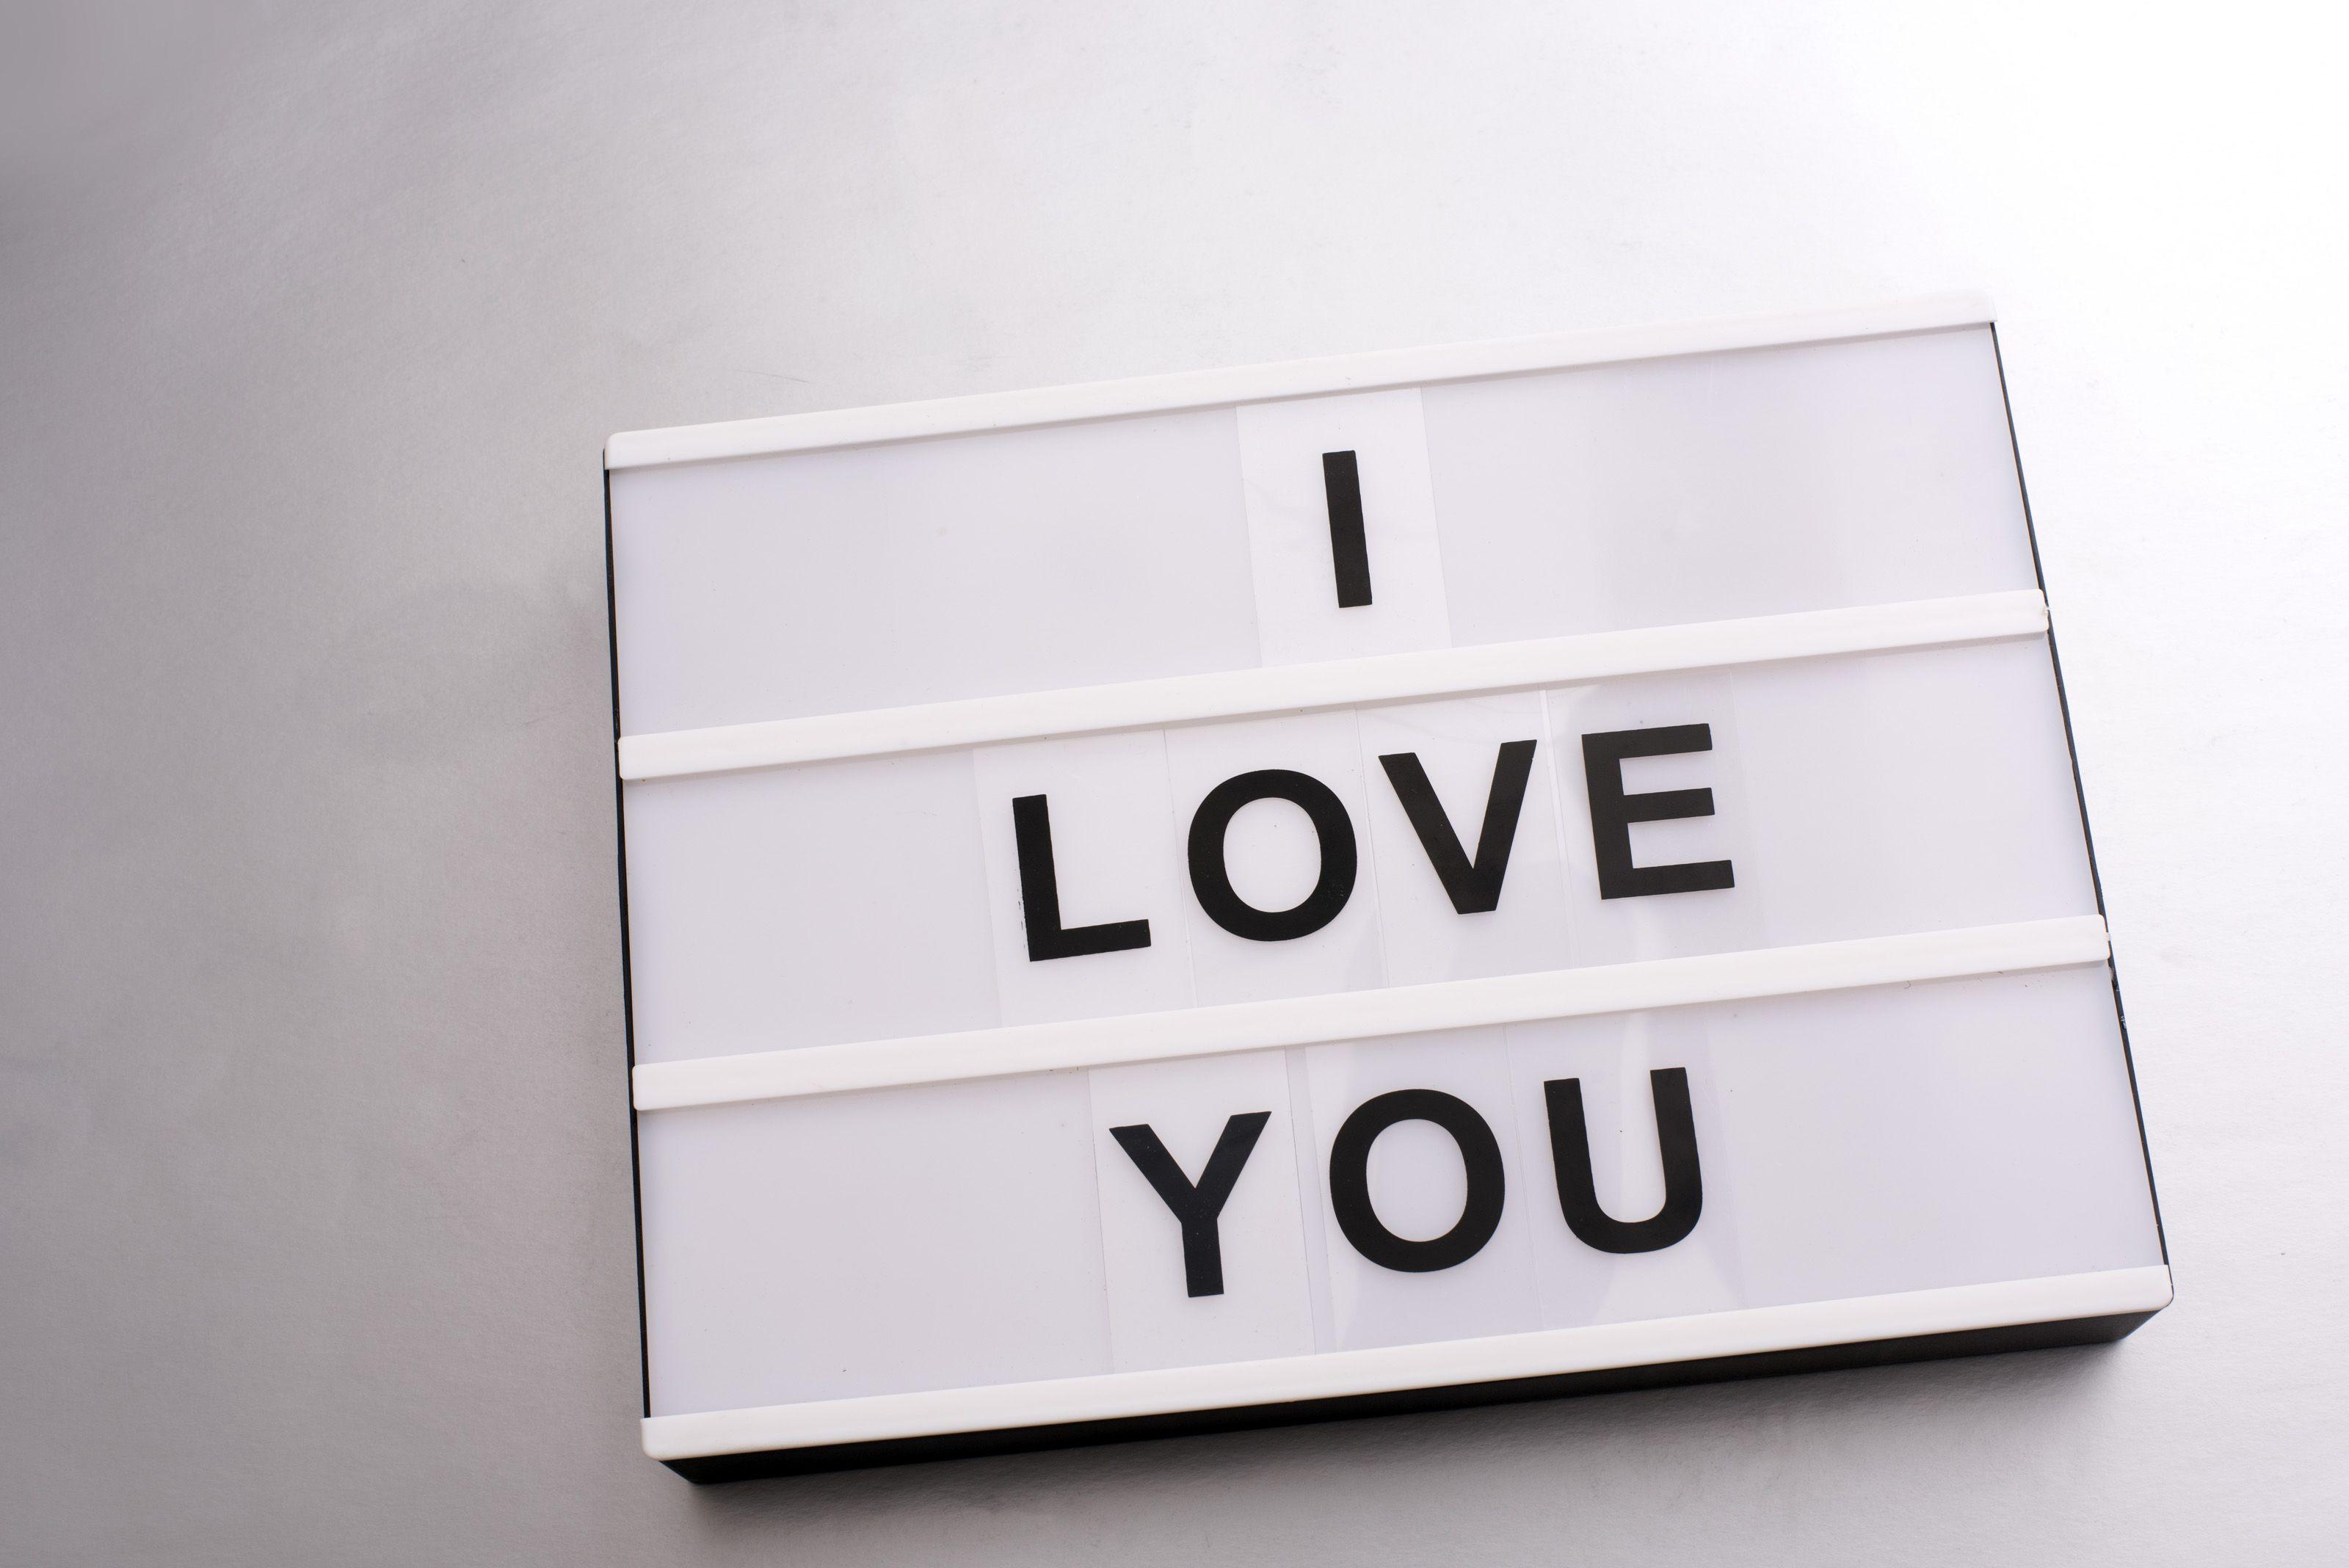 I Love You Black and White Logo - Free Stock Photo 13493 I Love You sign | freeimageslive